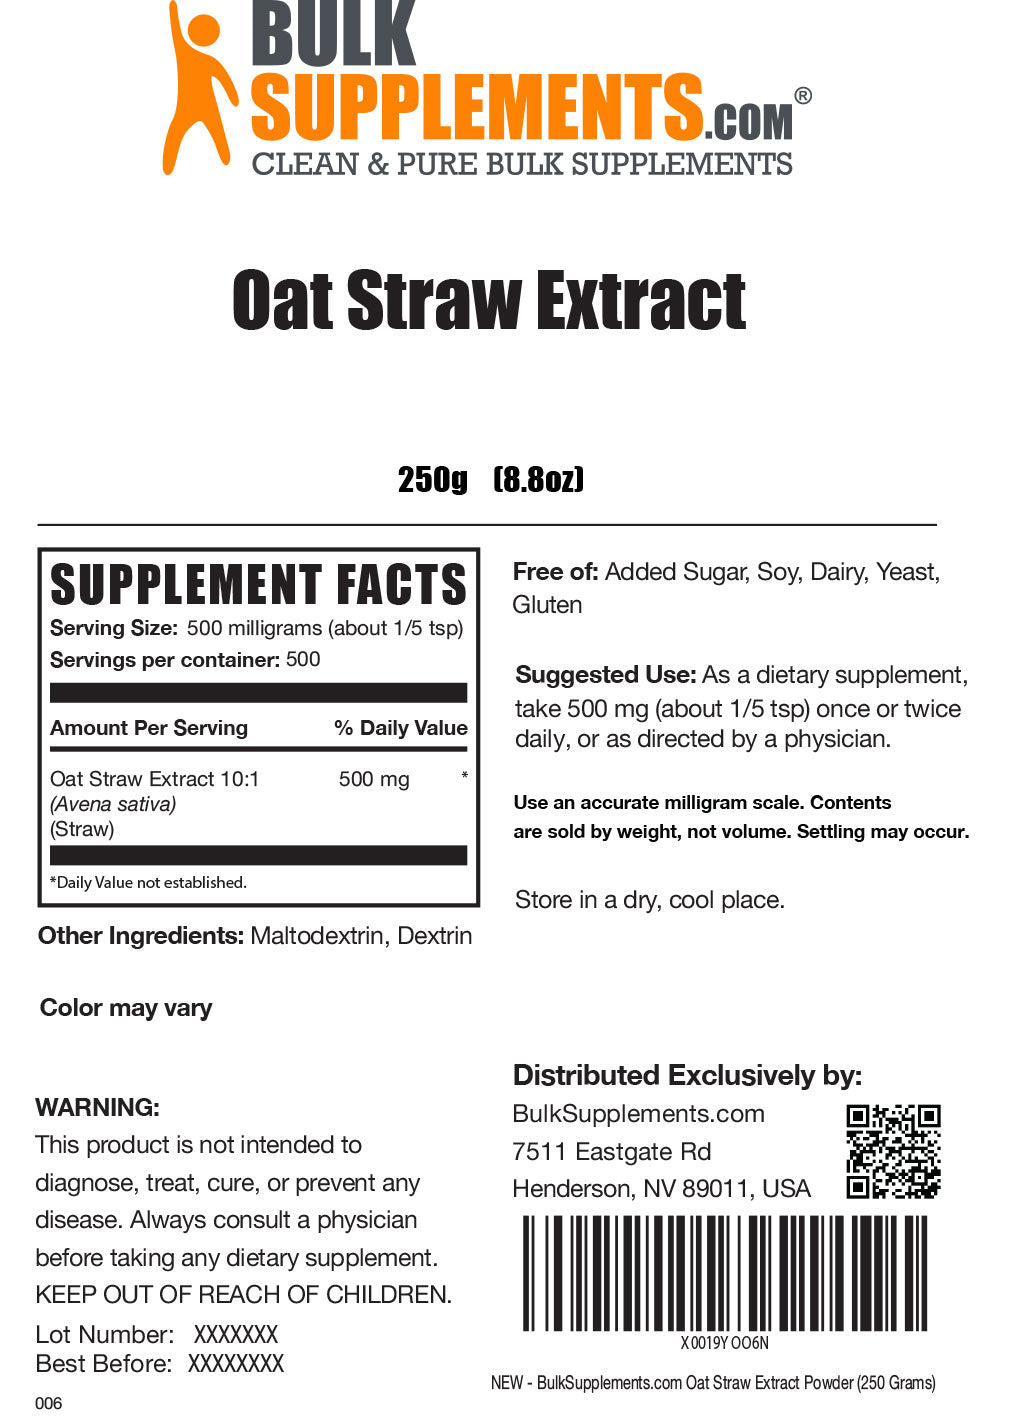 Oat Straw Extract Powder 250g Label